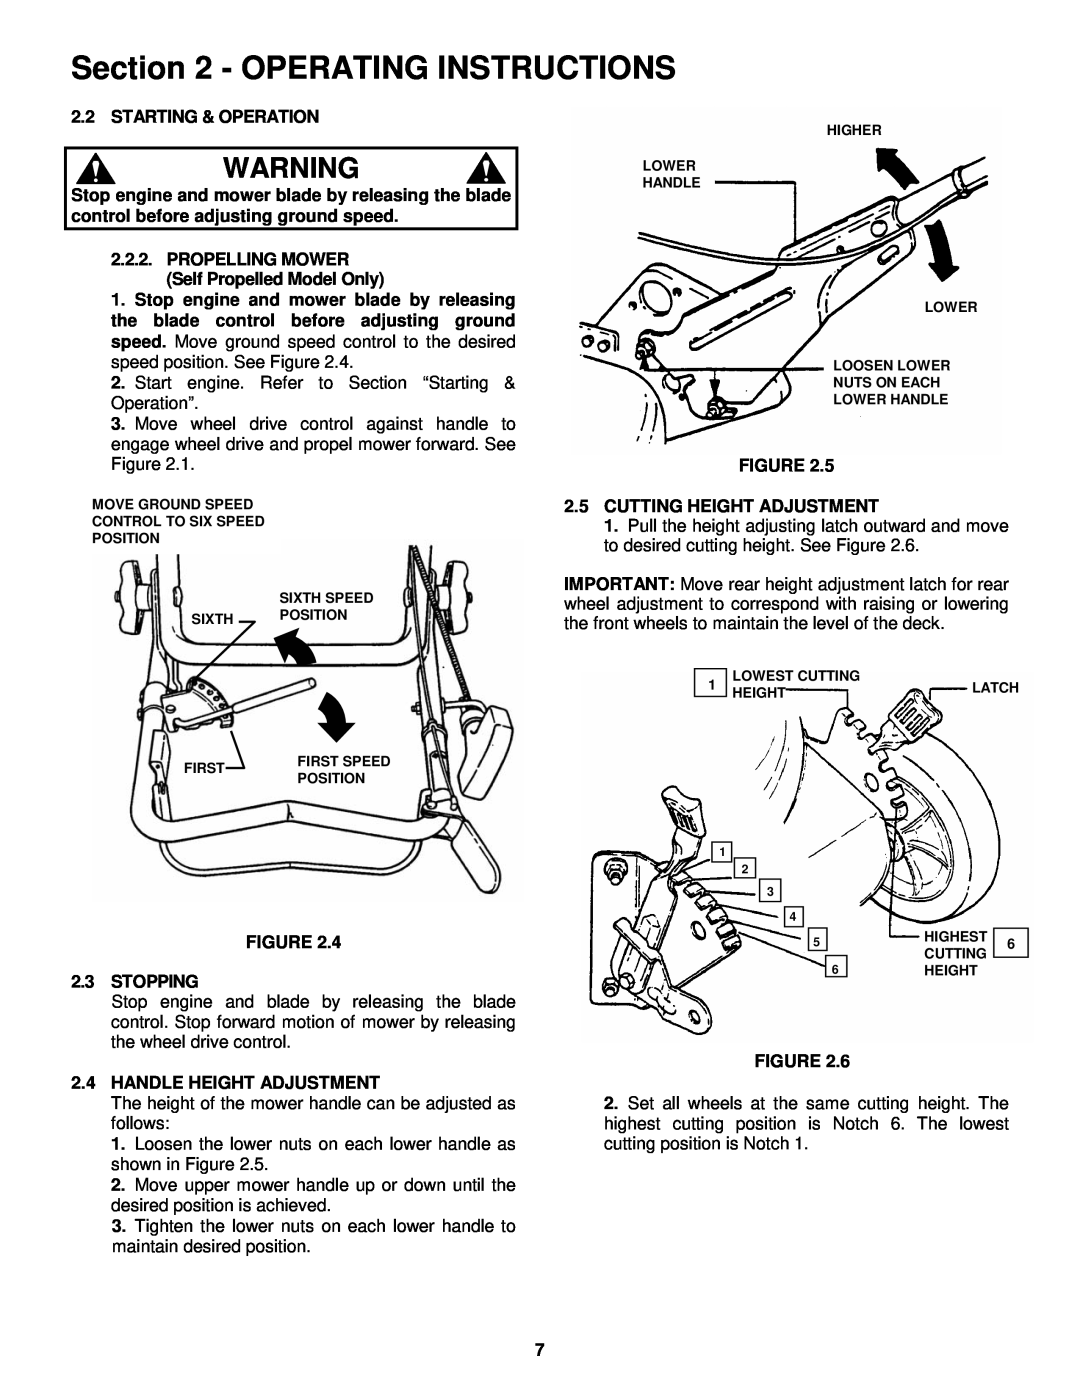 Snapper WMRP216517B Operating Instructions, Starting & Operation, Stopping, Handle Height Adjustment 